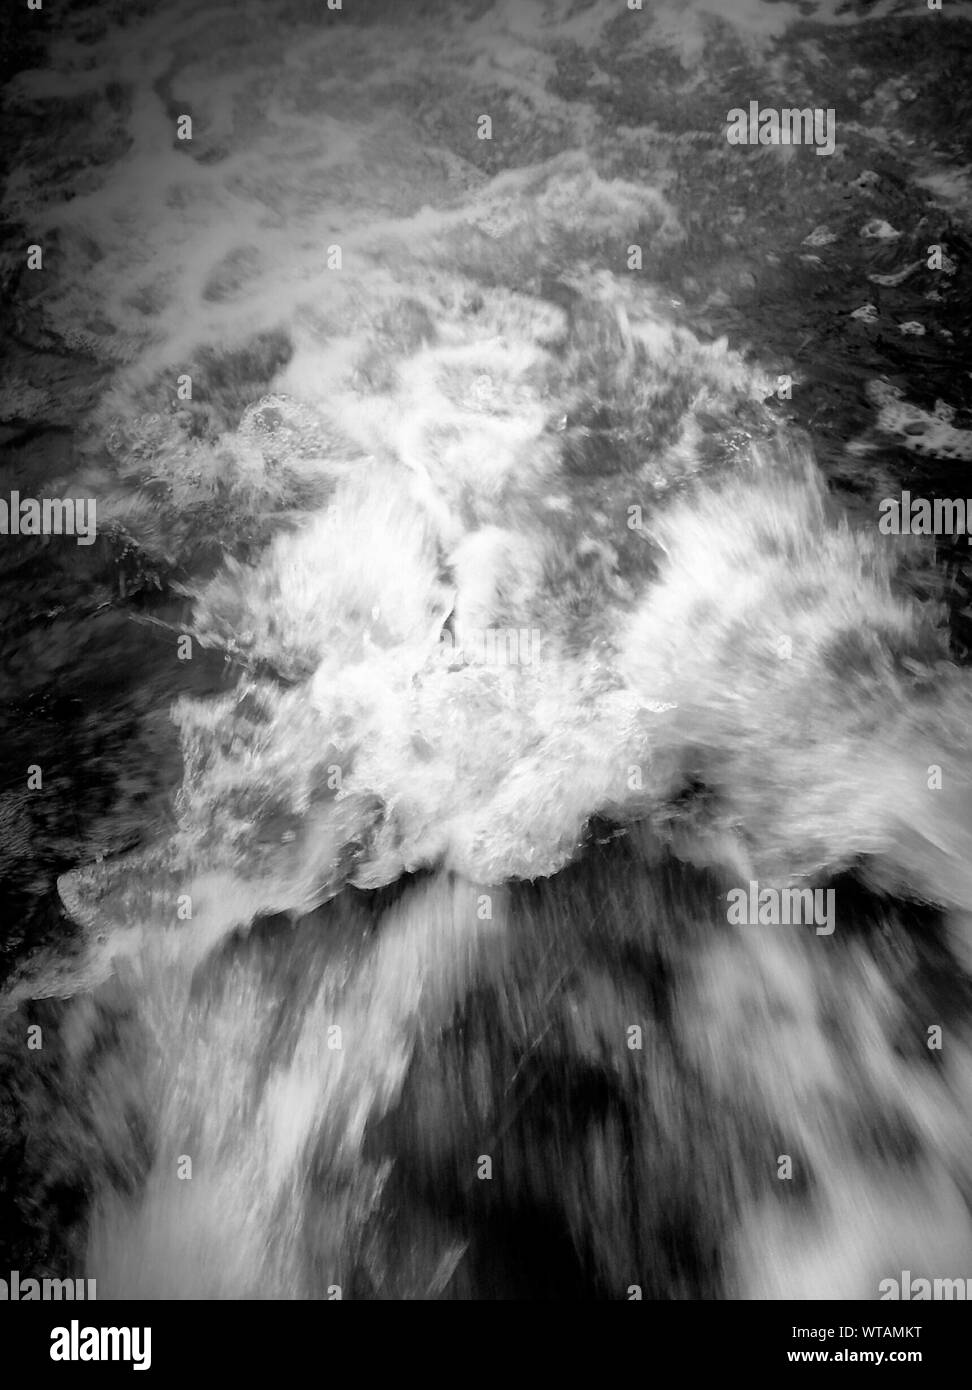 High Angle View Of Turbulent Water Stock Photo